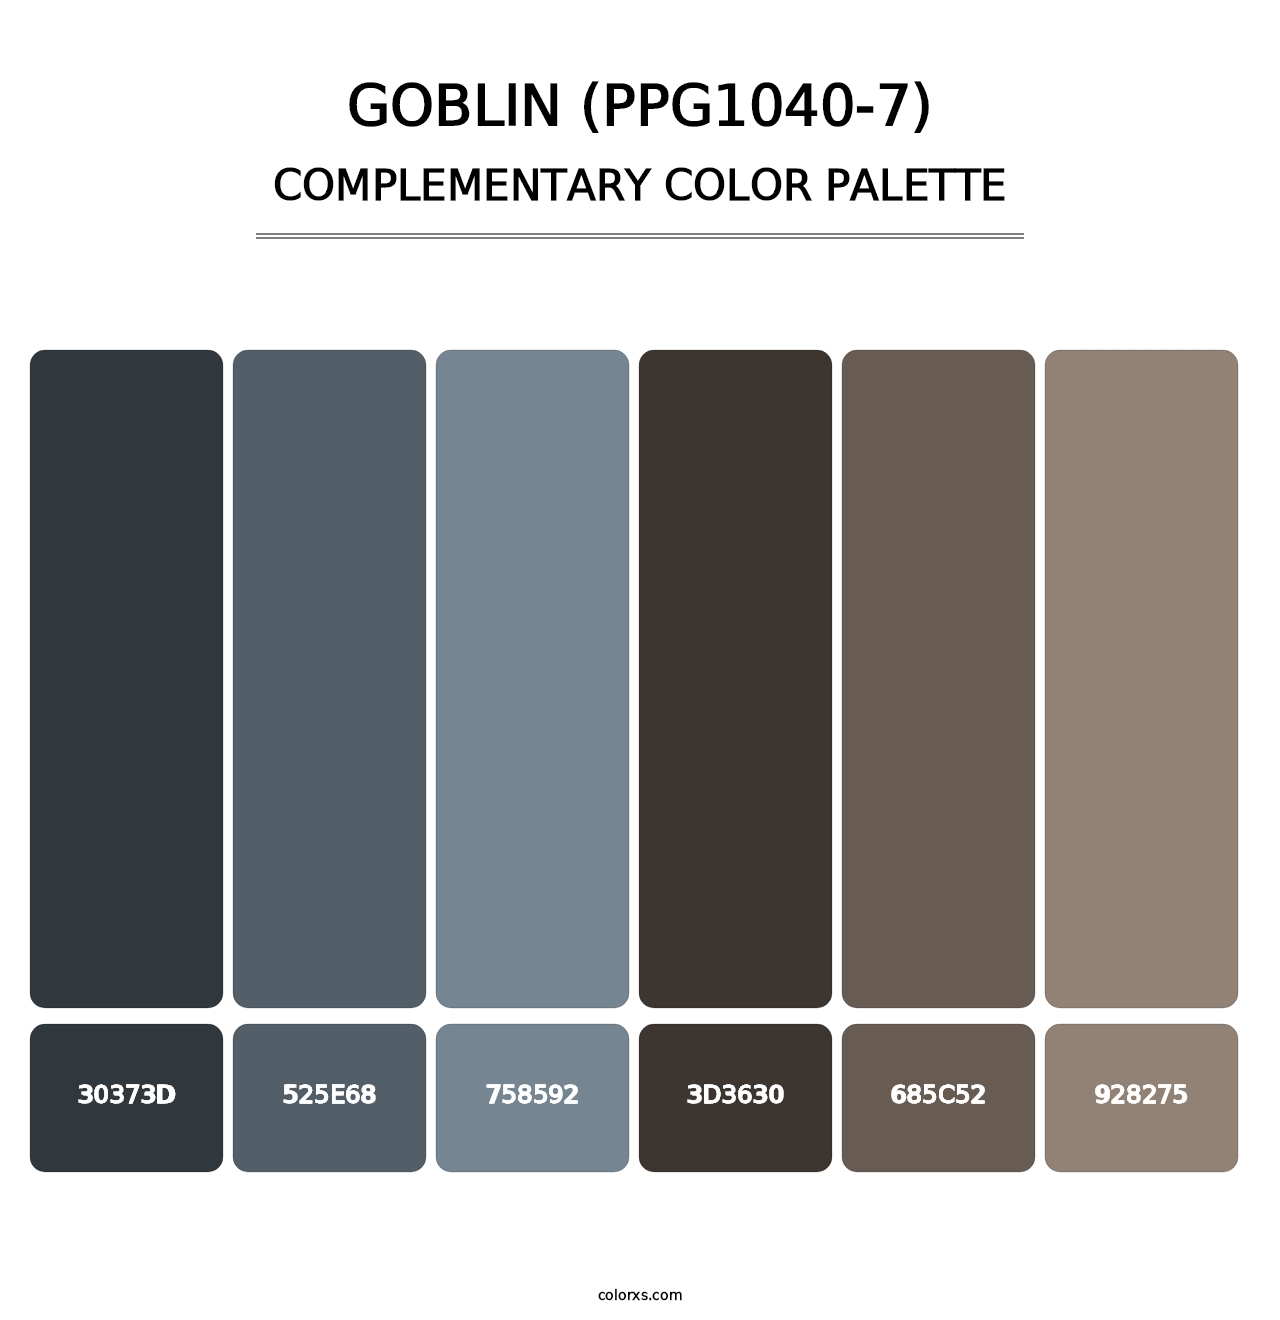 Goblin (PPG1040-7) - Complementary Color Palette